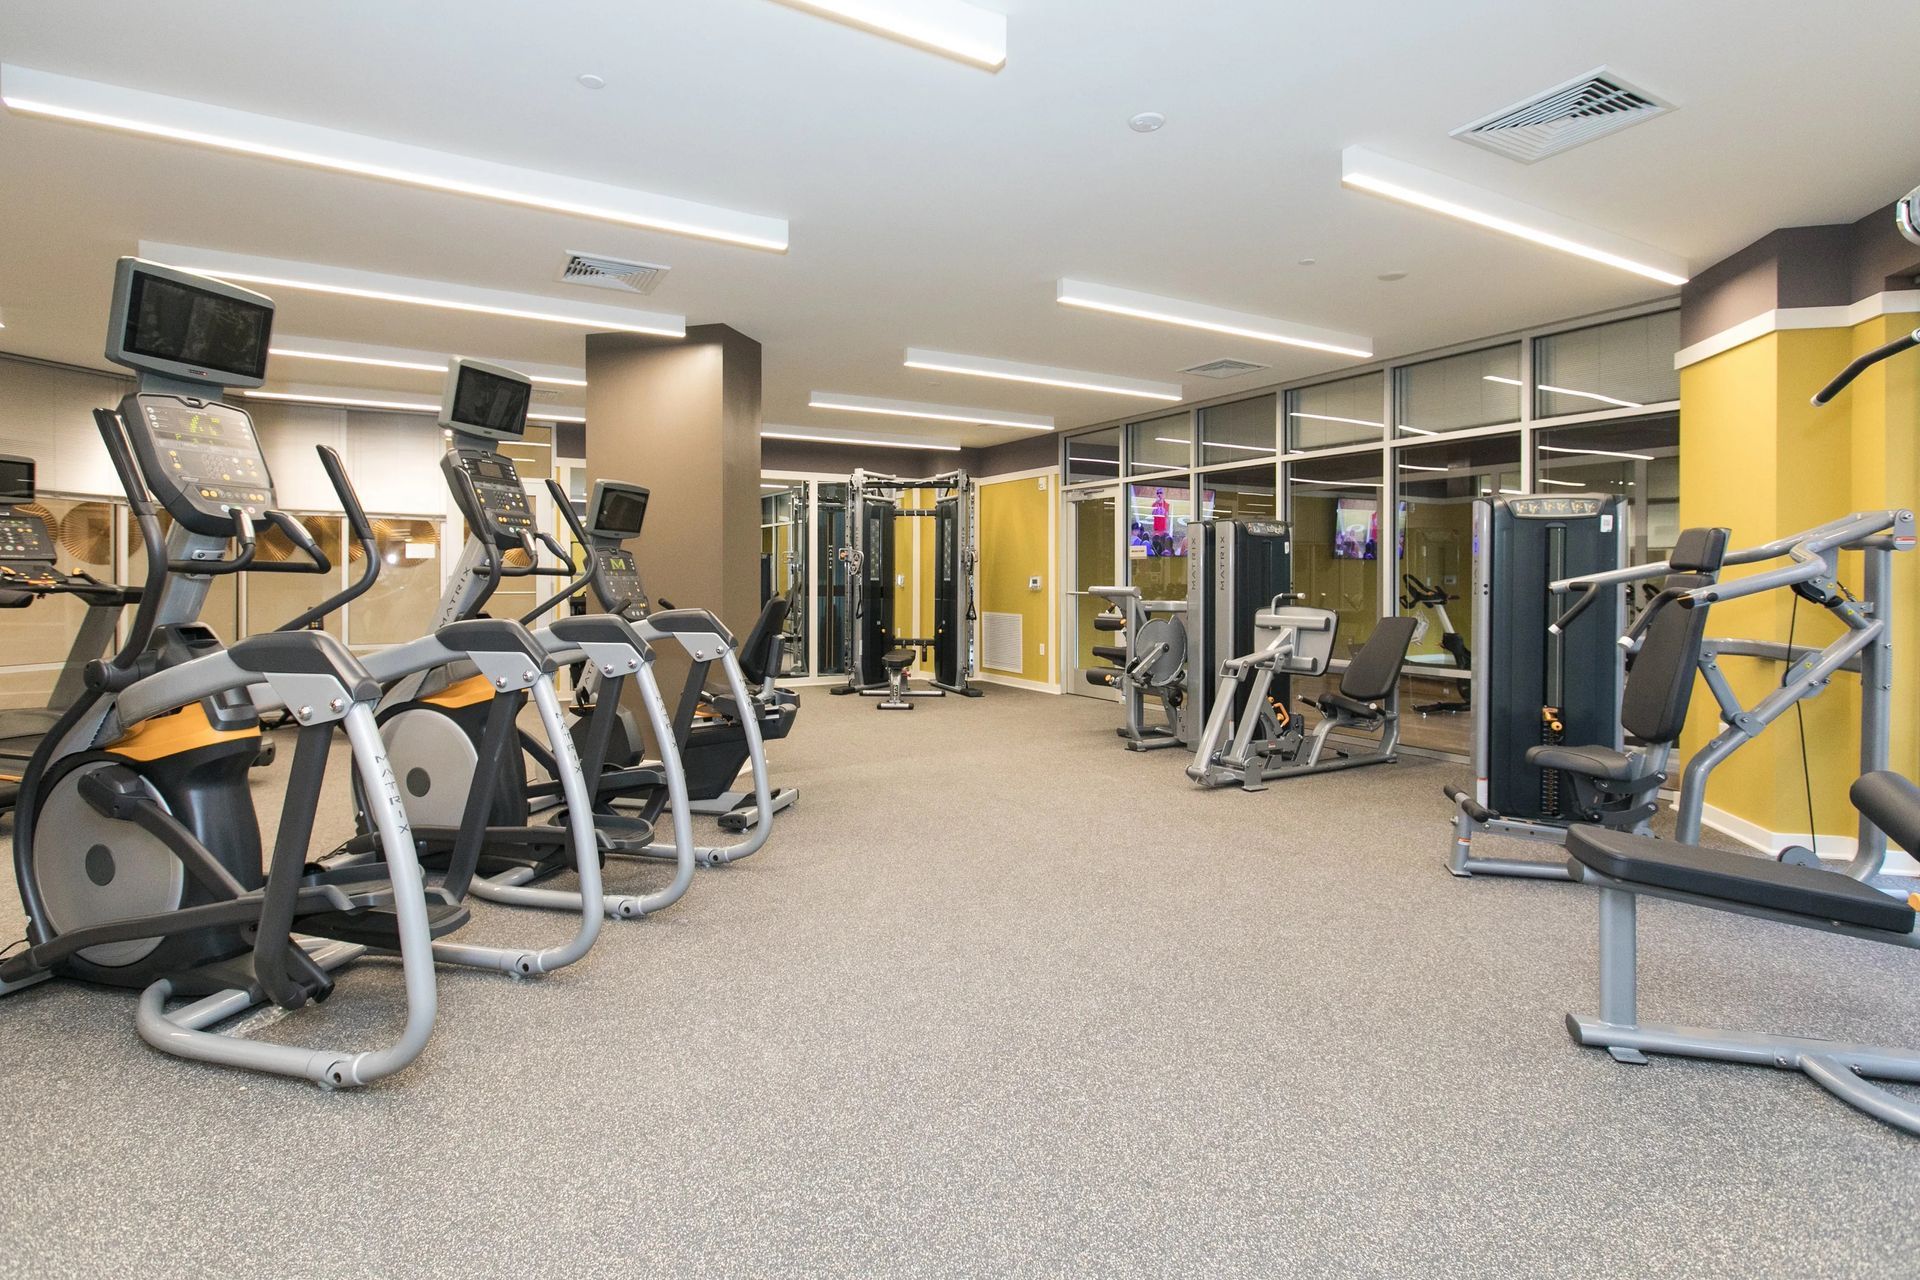 Fitness center at Verde at Howard Square.